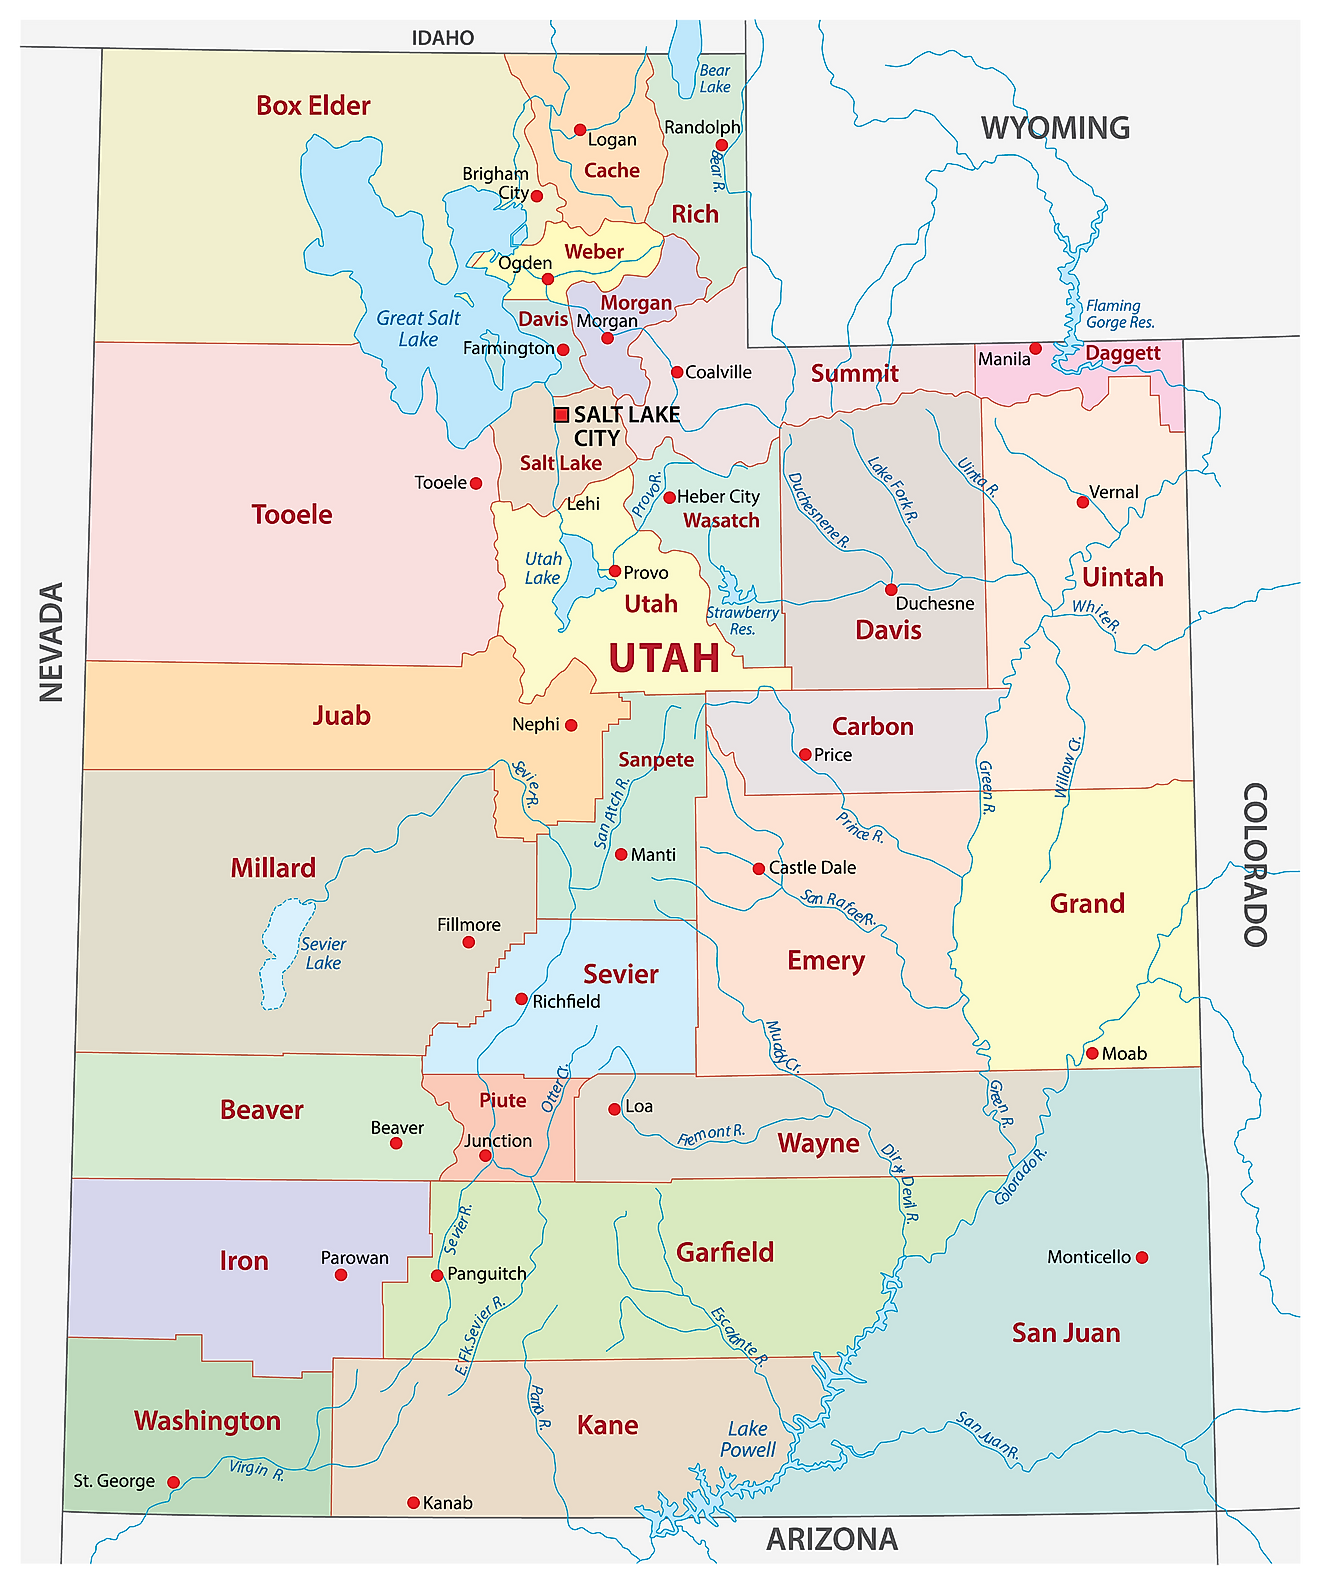 Administrative Map of Utah showing its 29 counties and the capital city - Salt Lake City